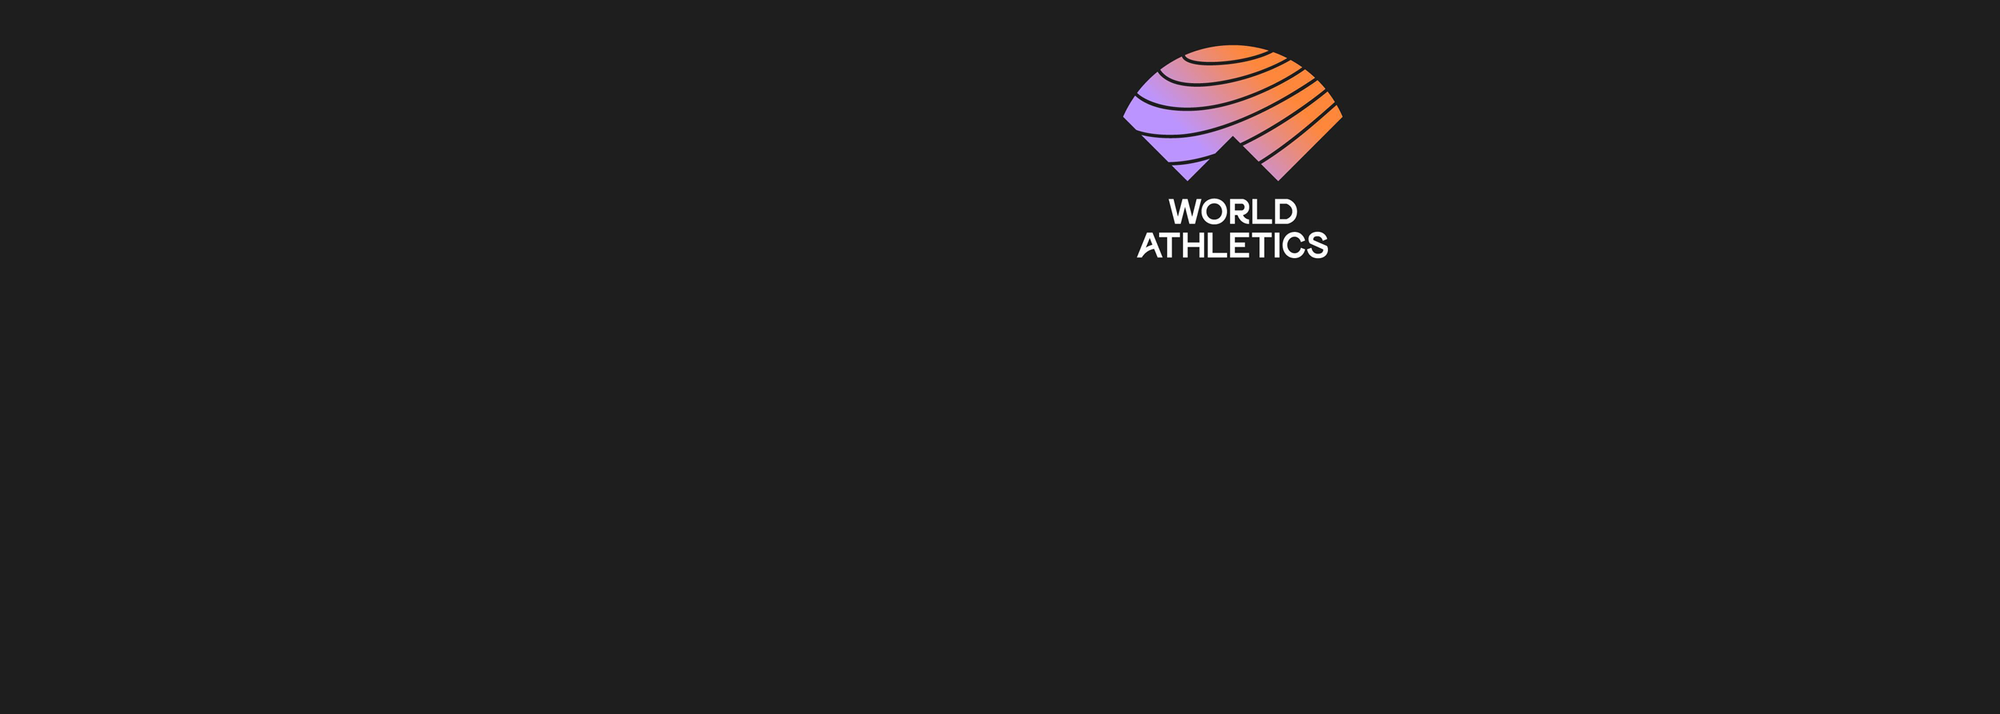 Seven Member Federations have been placed on the new Competition Manipulation Watch List following an investigation of suspicious competition results conducted by the Athletics Integrity Unit